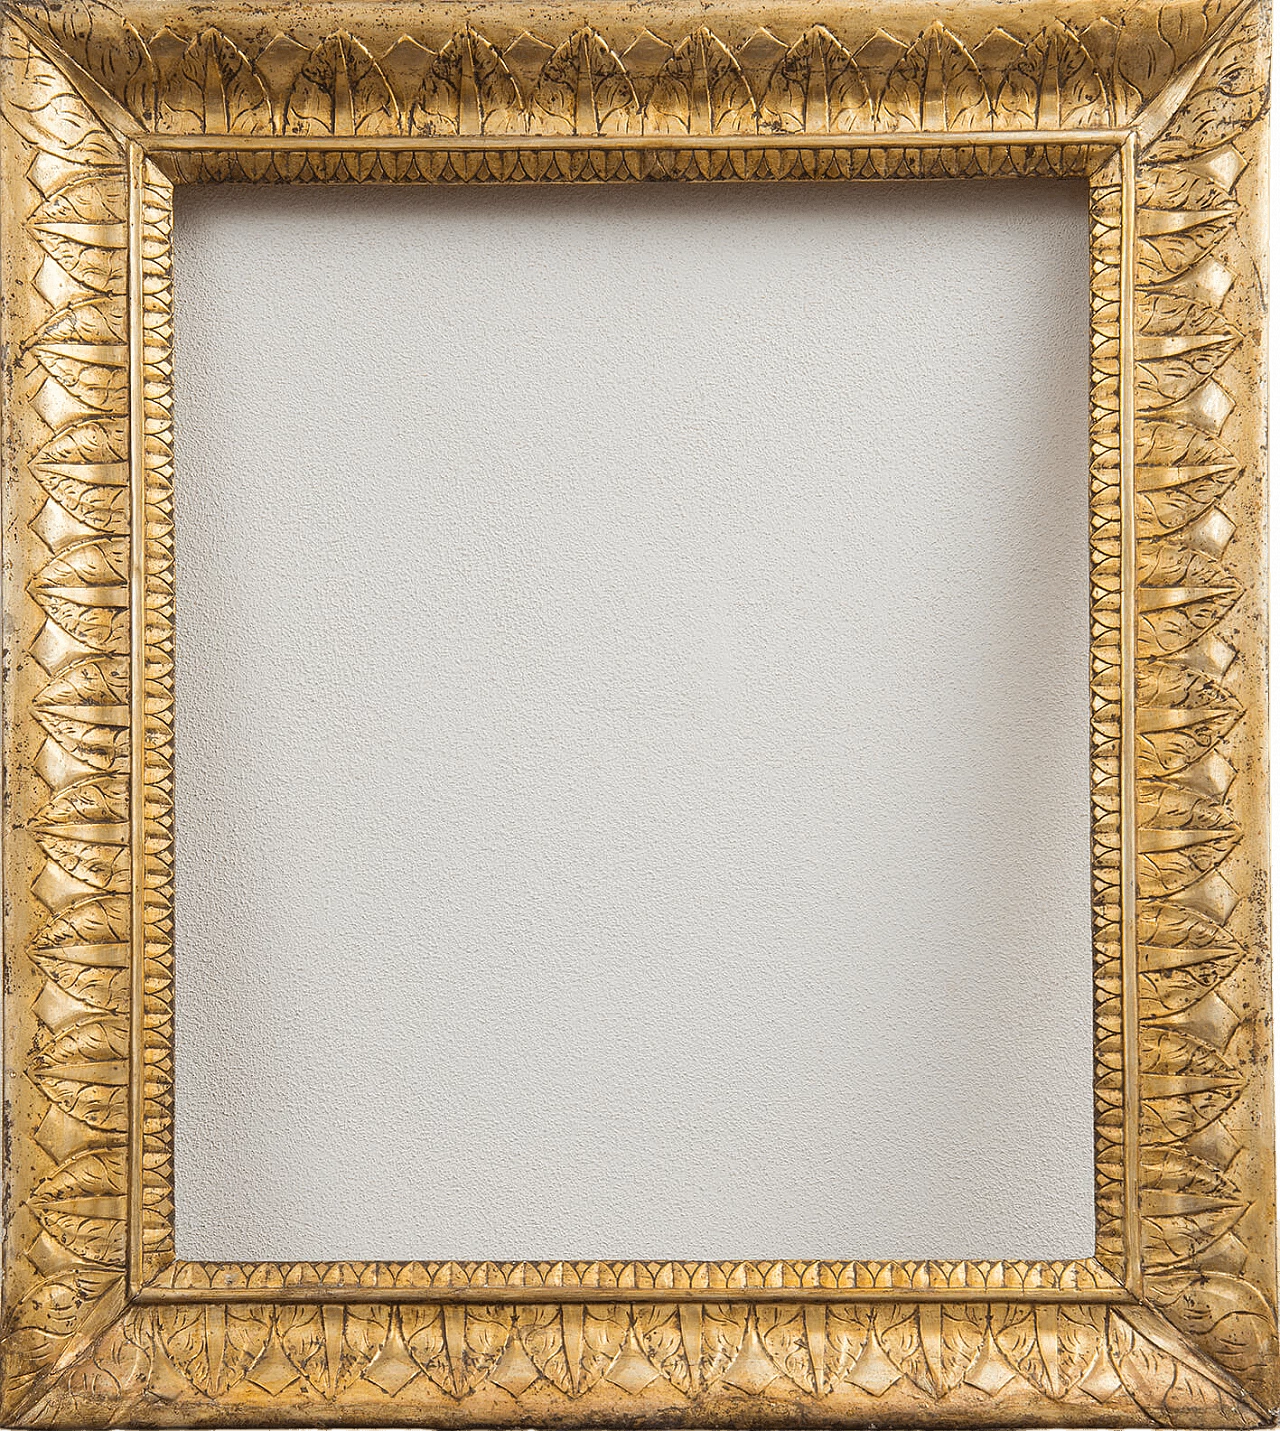 Neapolitan Empire carved and gilded wood frame, early 19th century 4